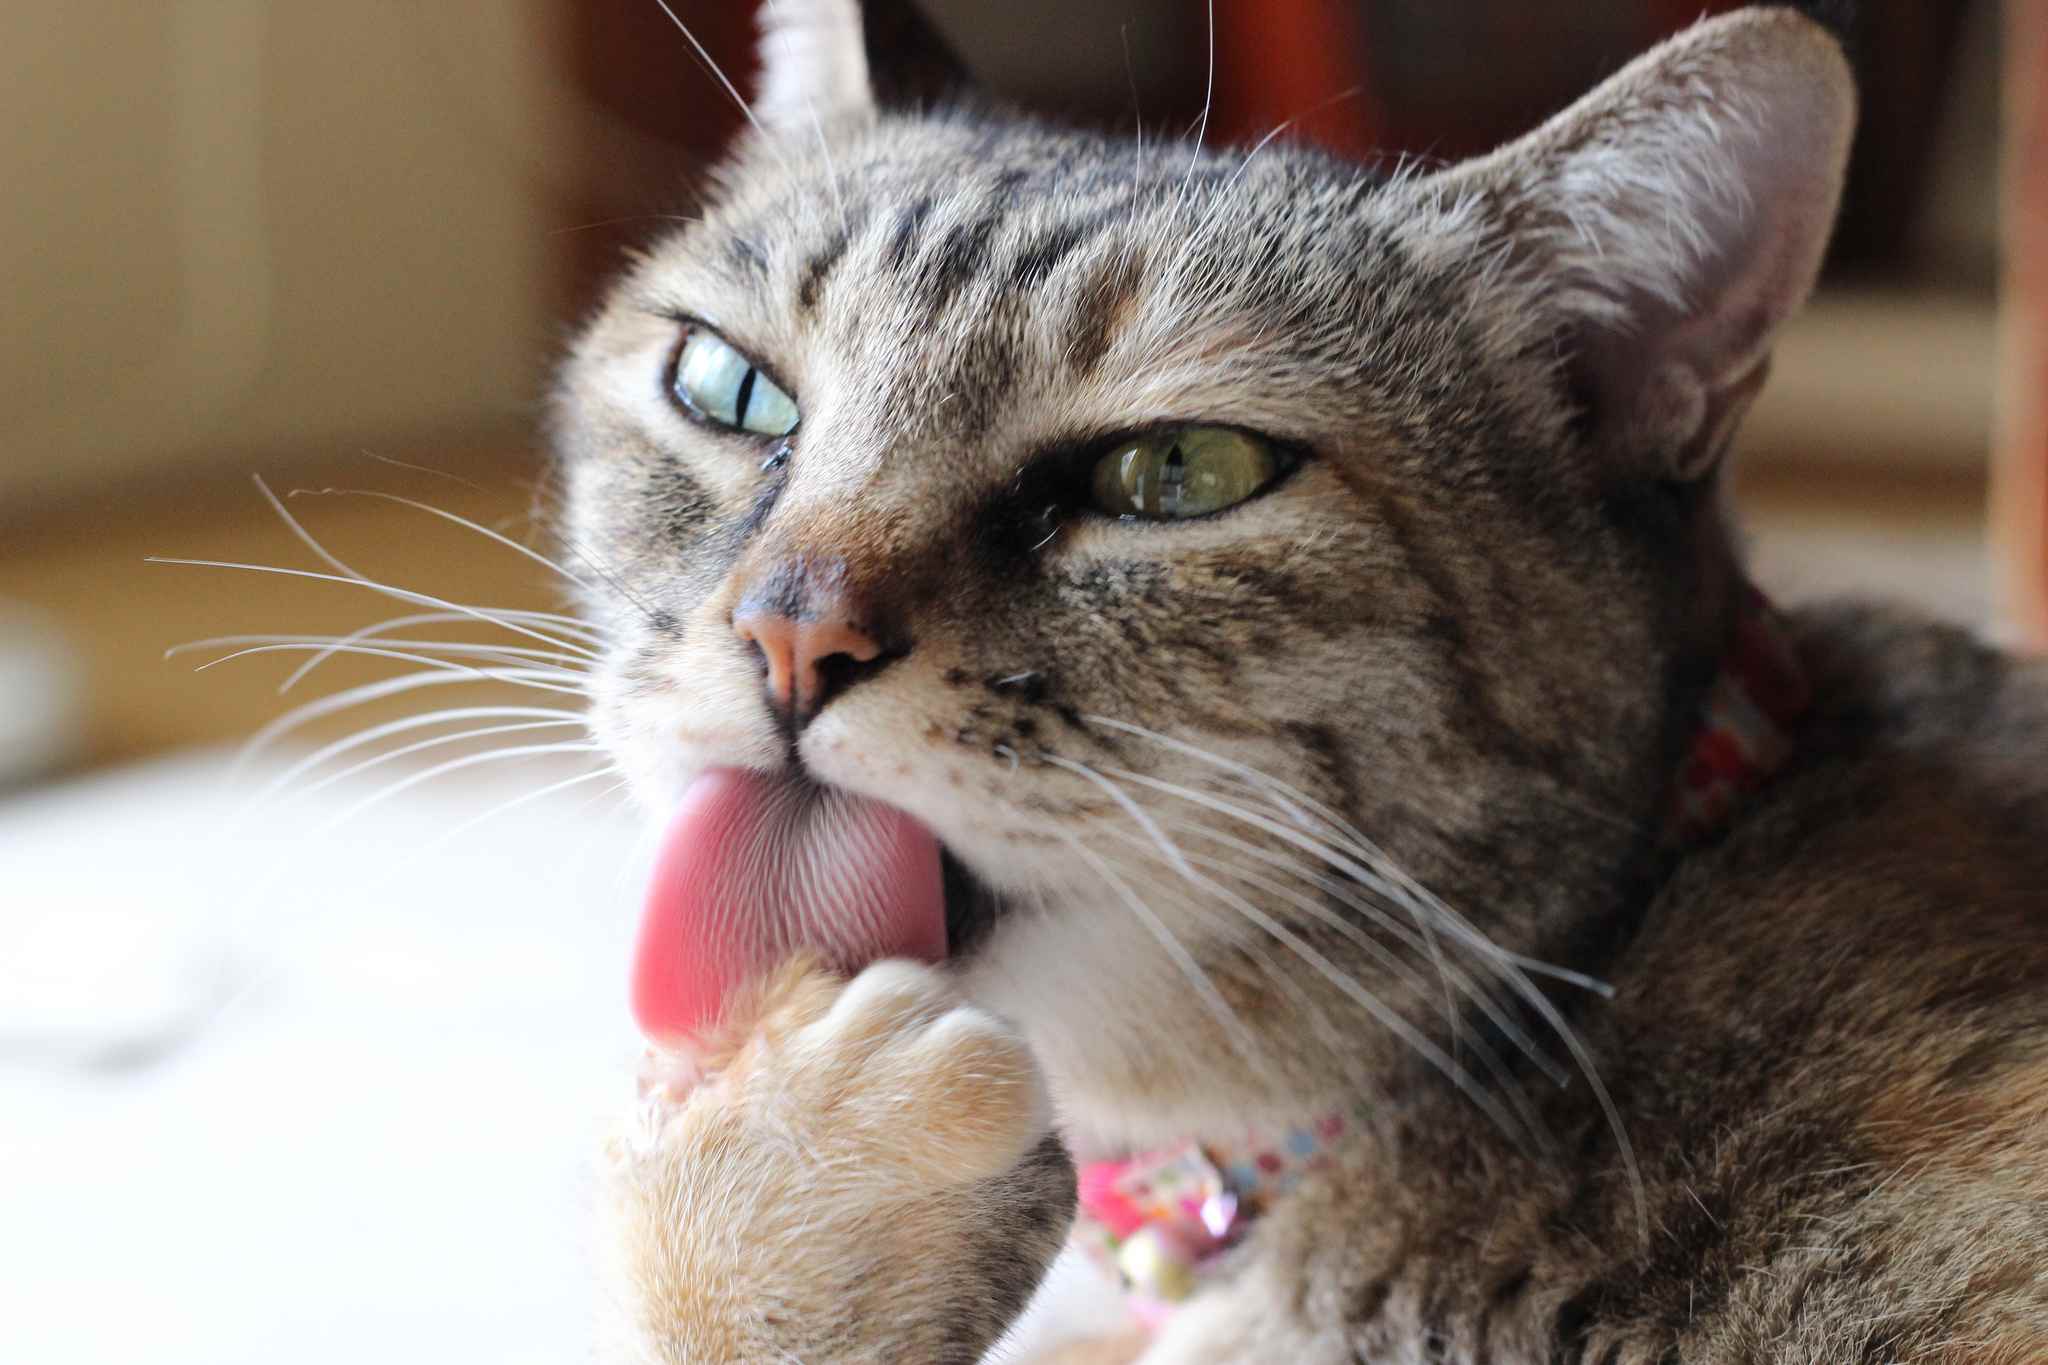 Tabby cat licking its front paw.